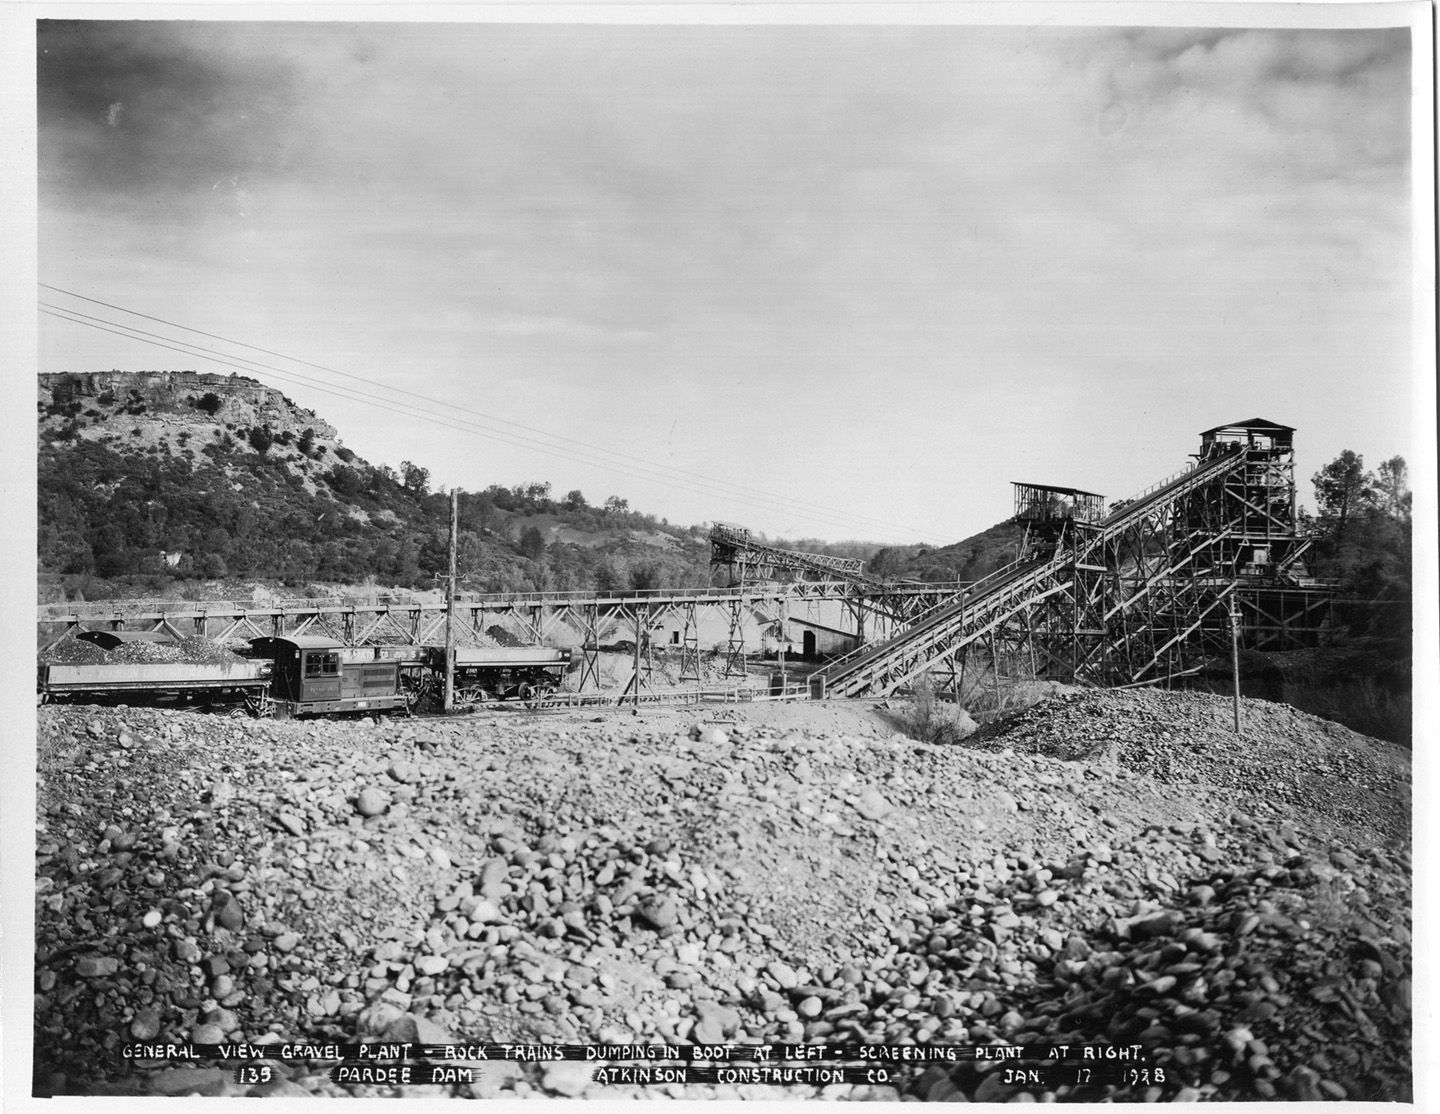 General view gravel plant - rock trains dumping in boot at left - screening plant at right. (January 1928)